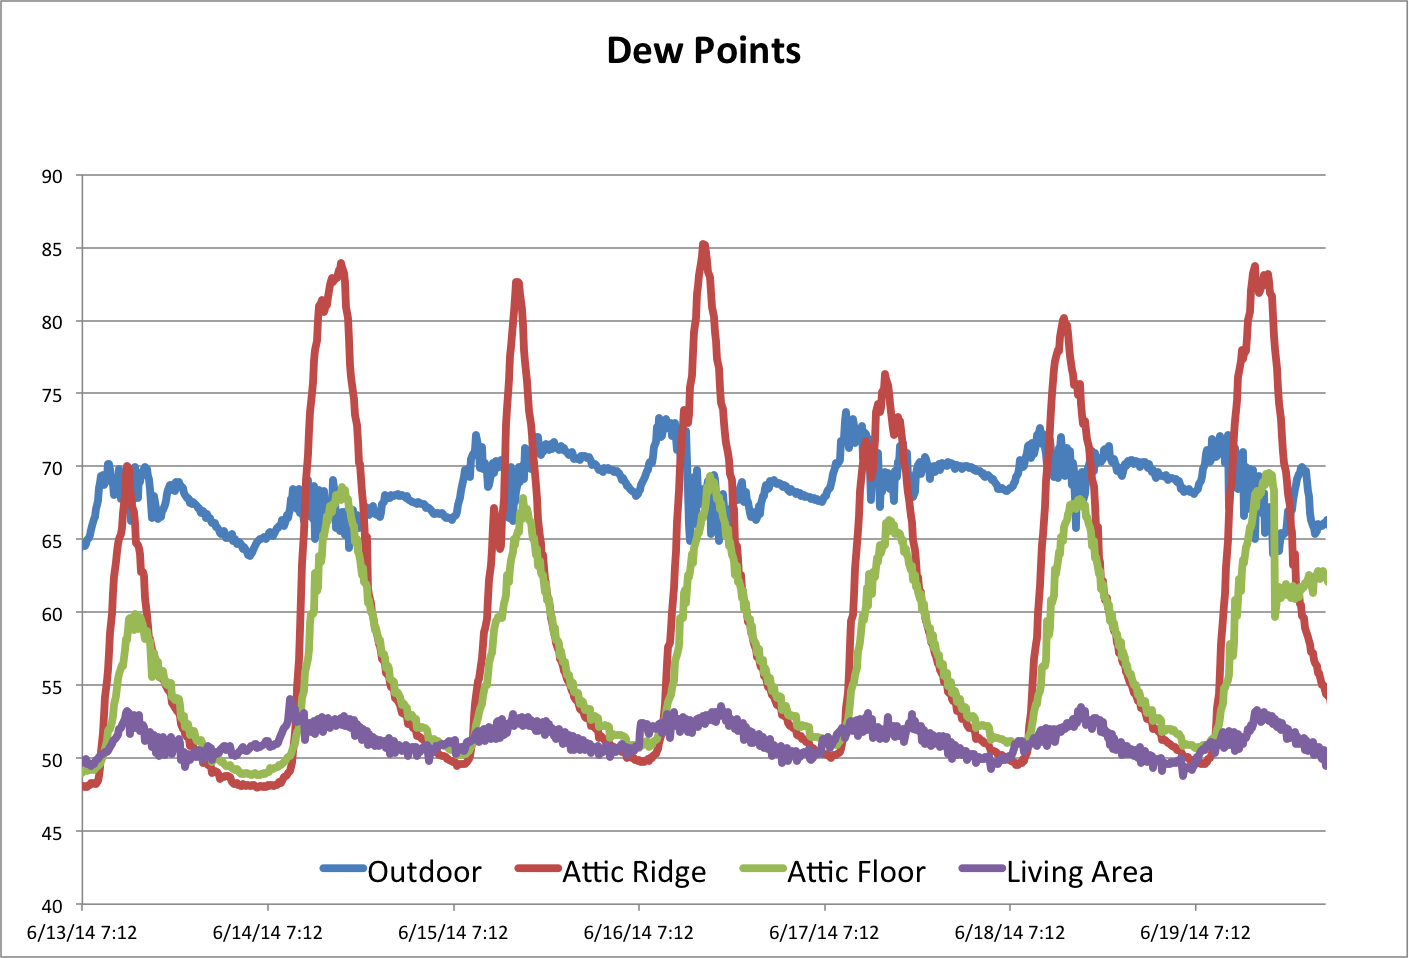 The dew point temperature at four locations in a house with a spray foam insulated attic